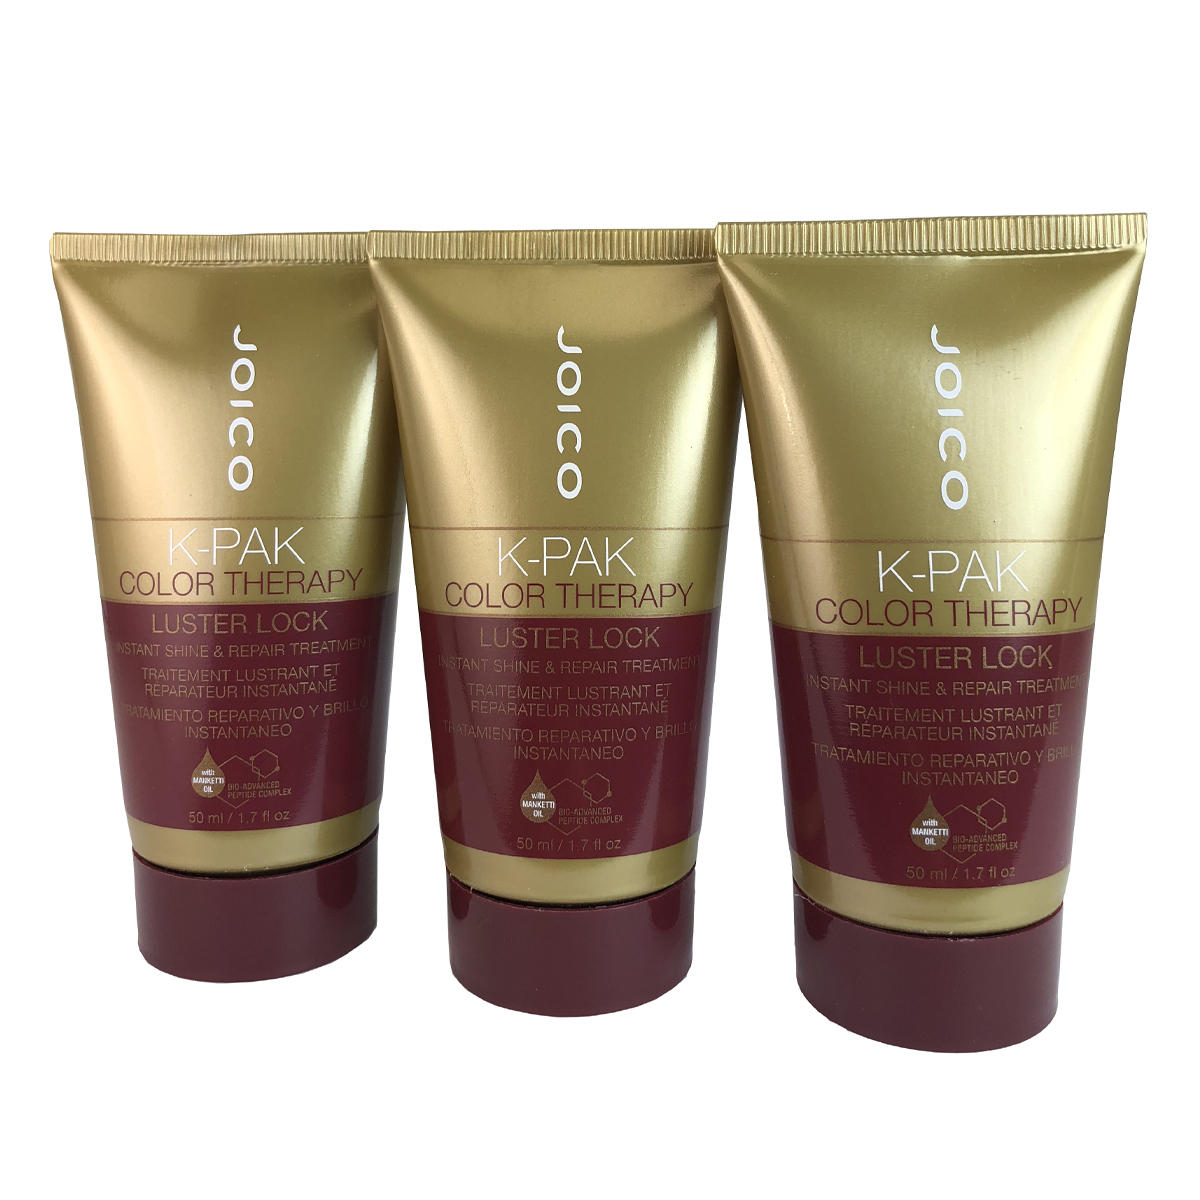 Joico K-Pak Color Ther. Luster Lock 1.7 oz - 3 pcs. - image 1 of 2